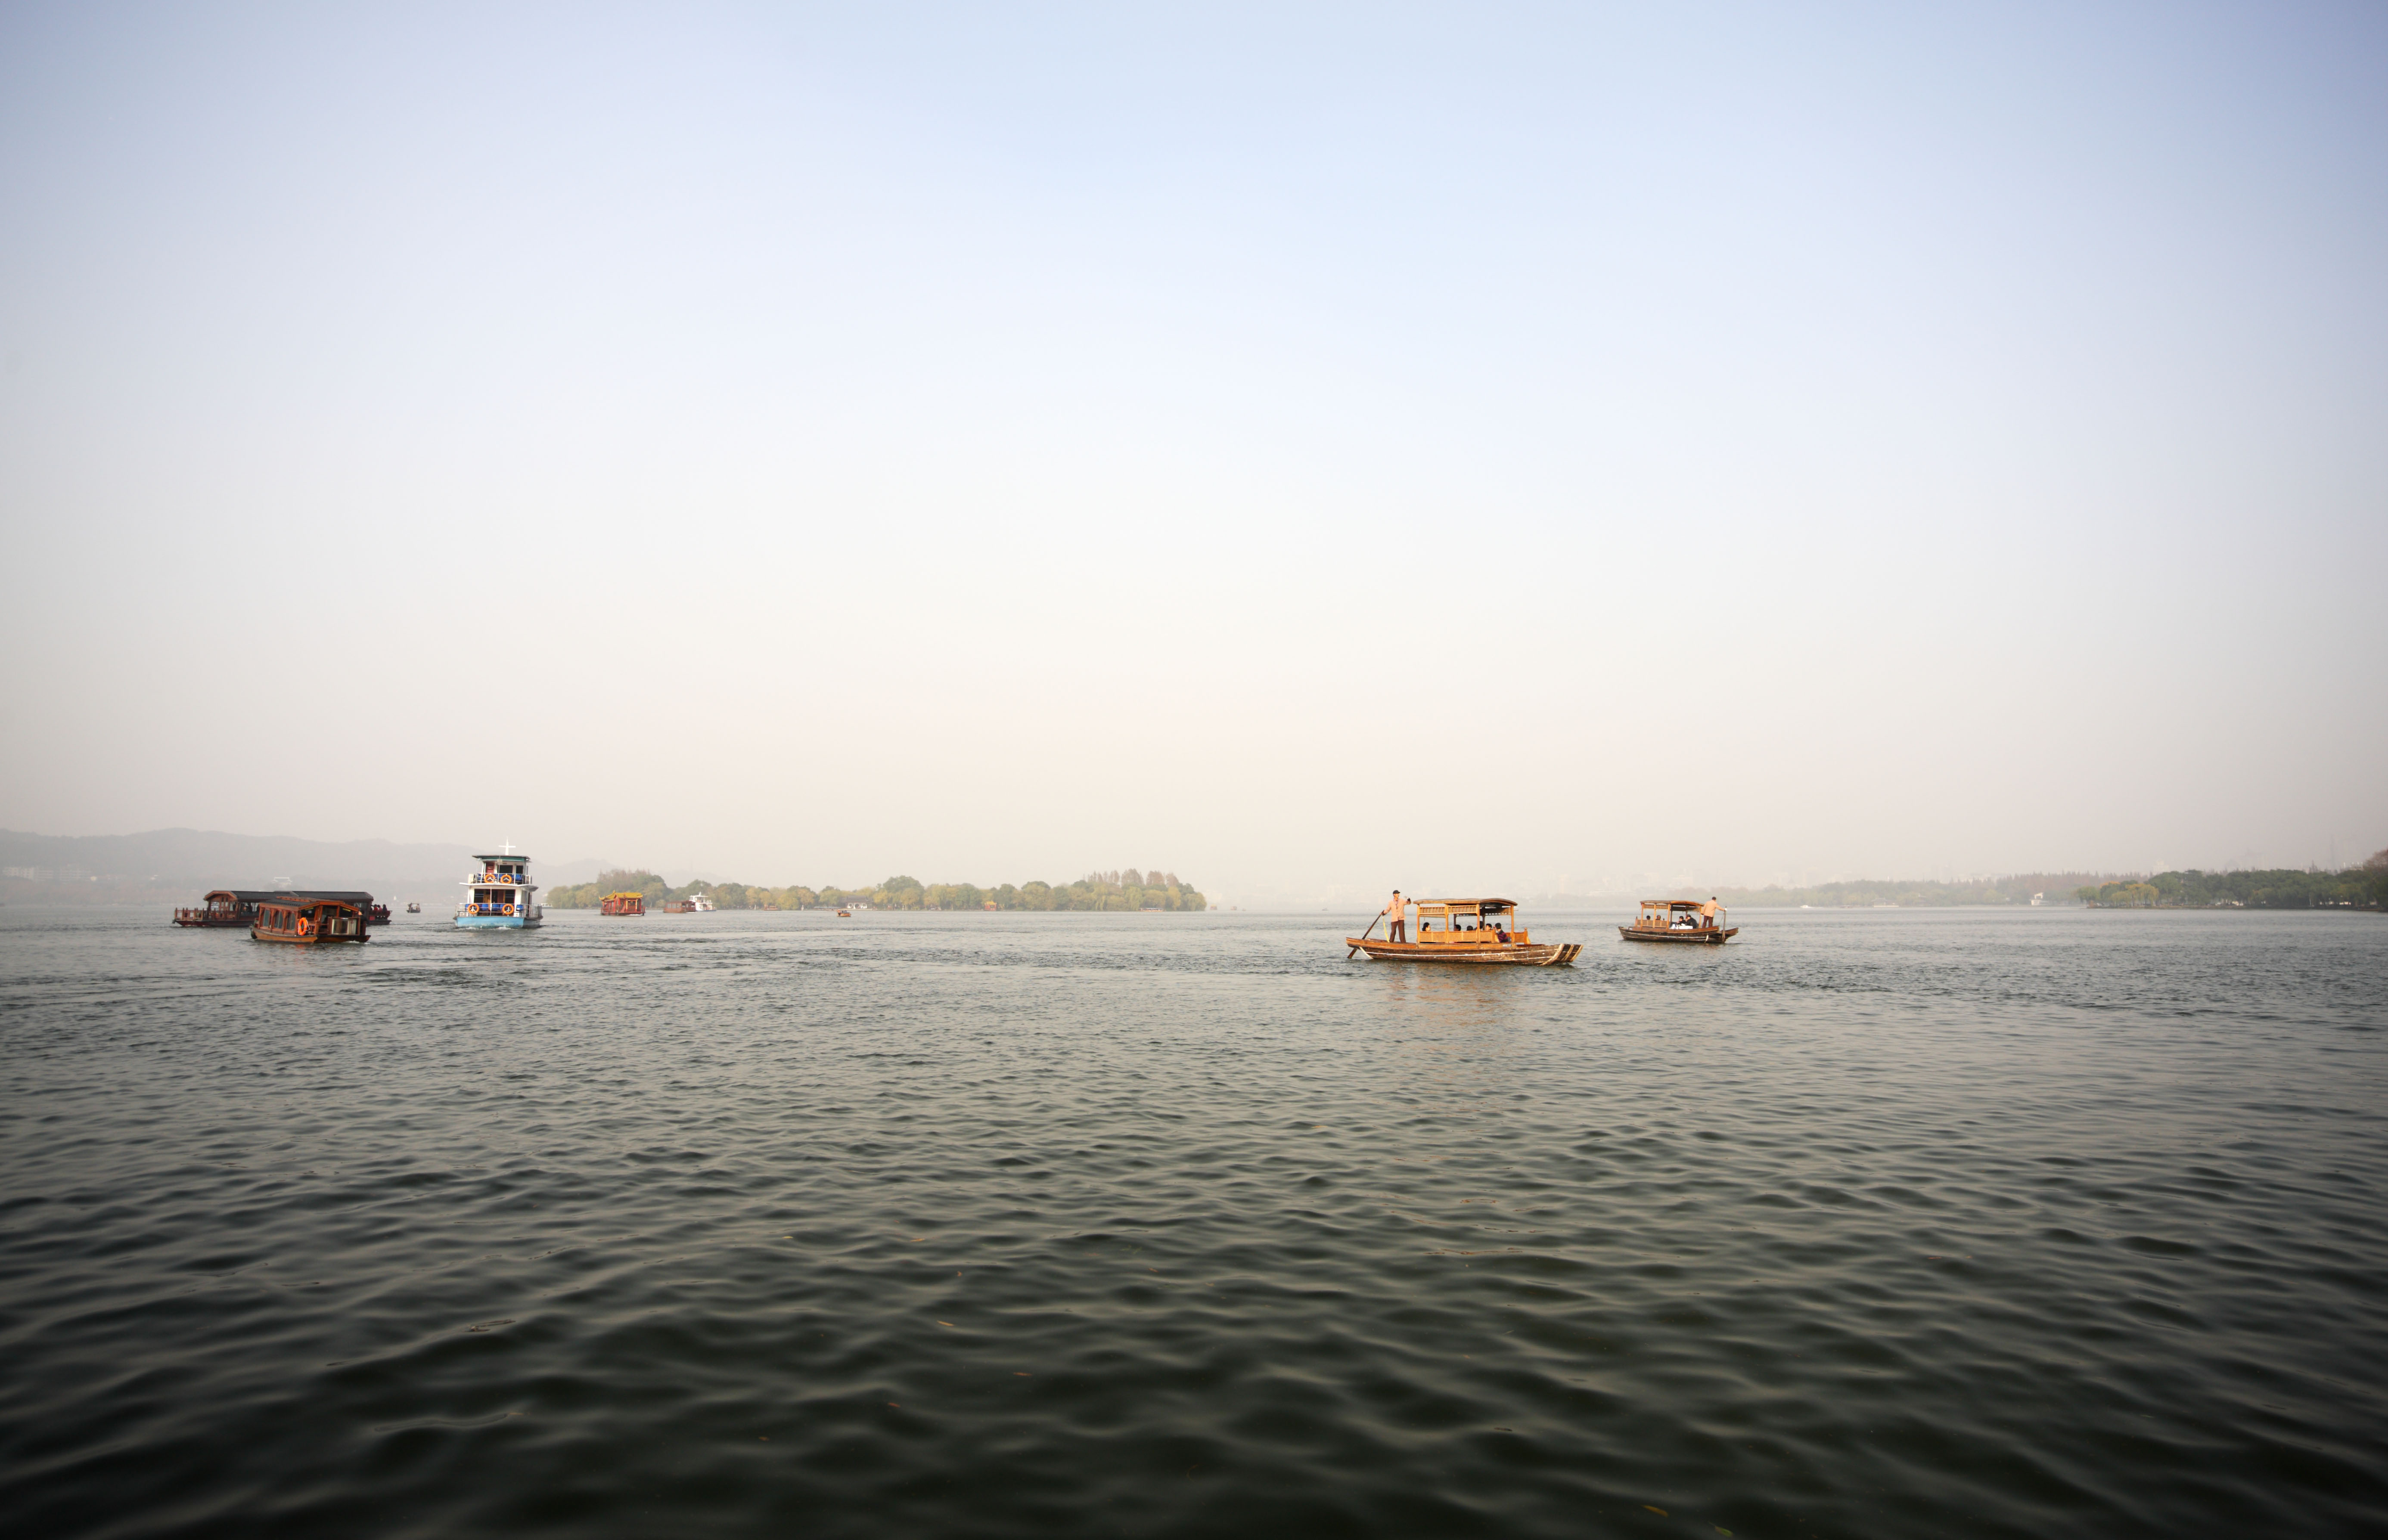 photo,material,free,landscape,picture,stock photo,Creative Commons,Xi-hu lake, ship, Saiko, , The surface of the water